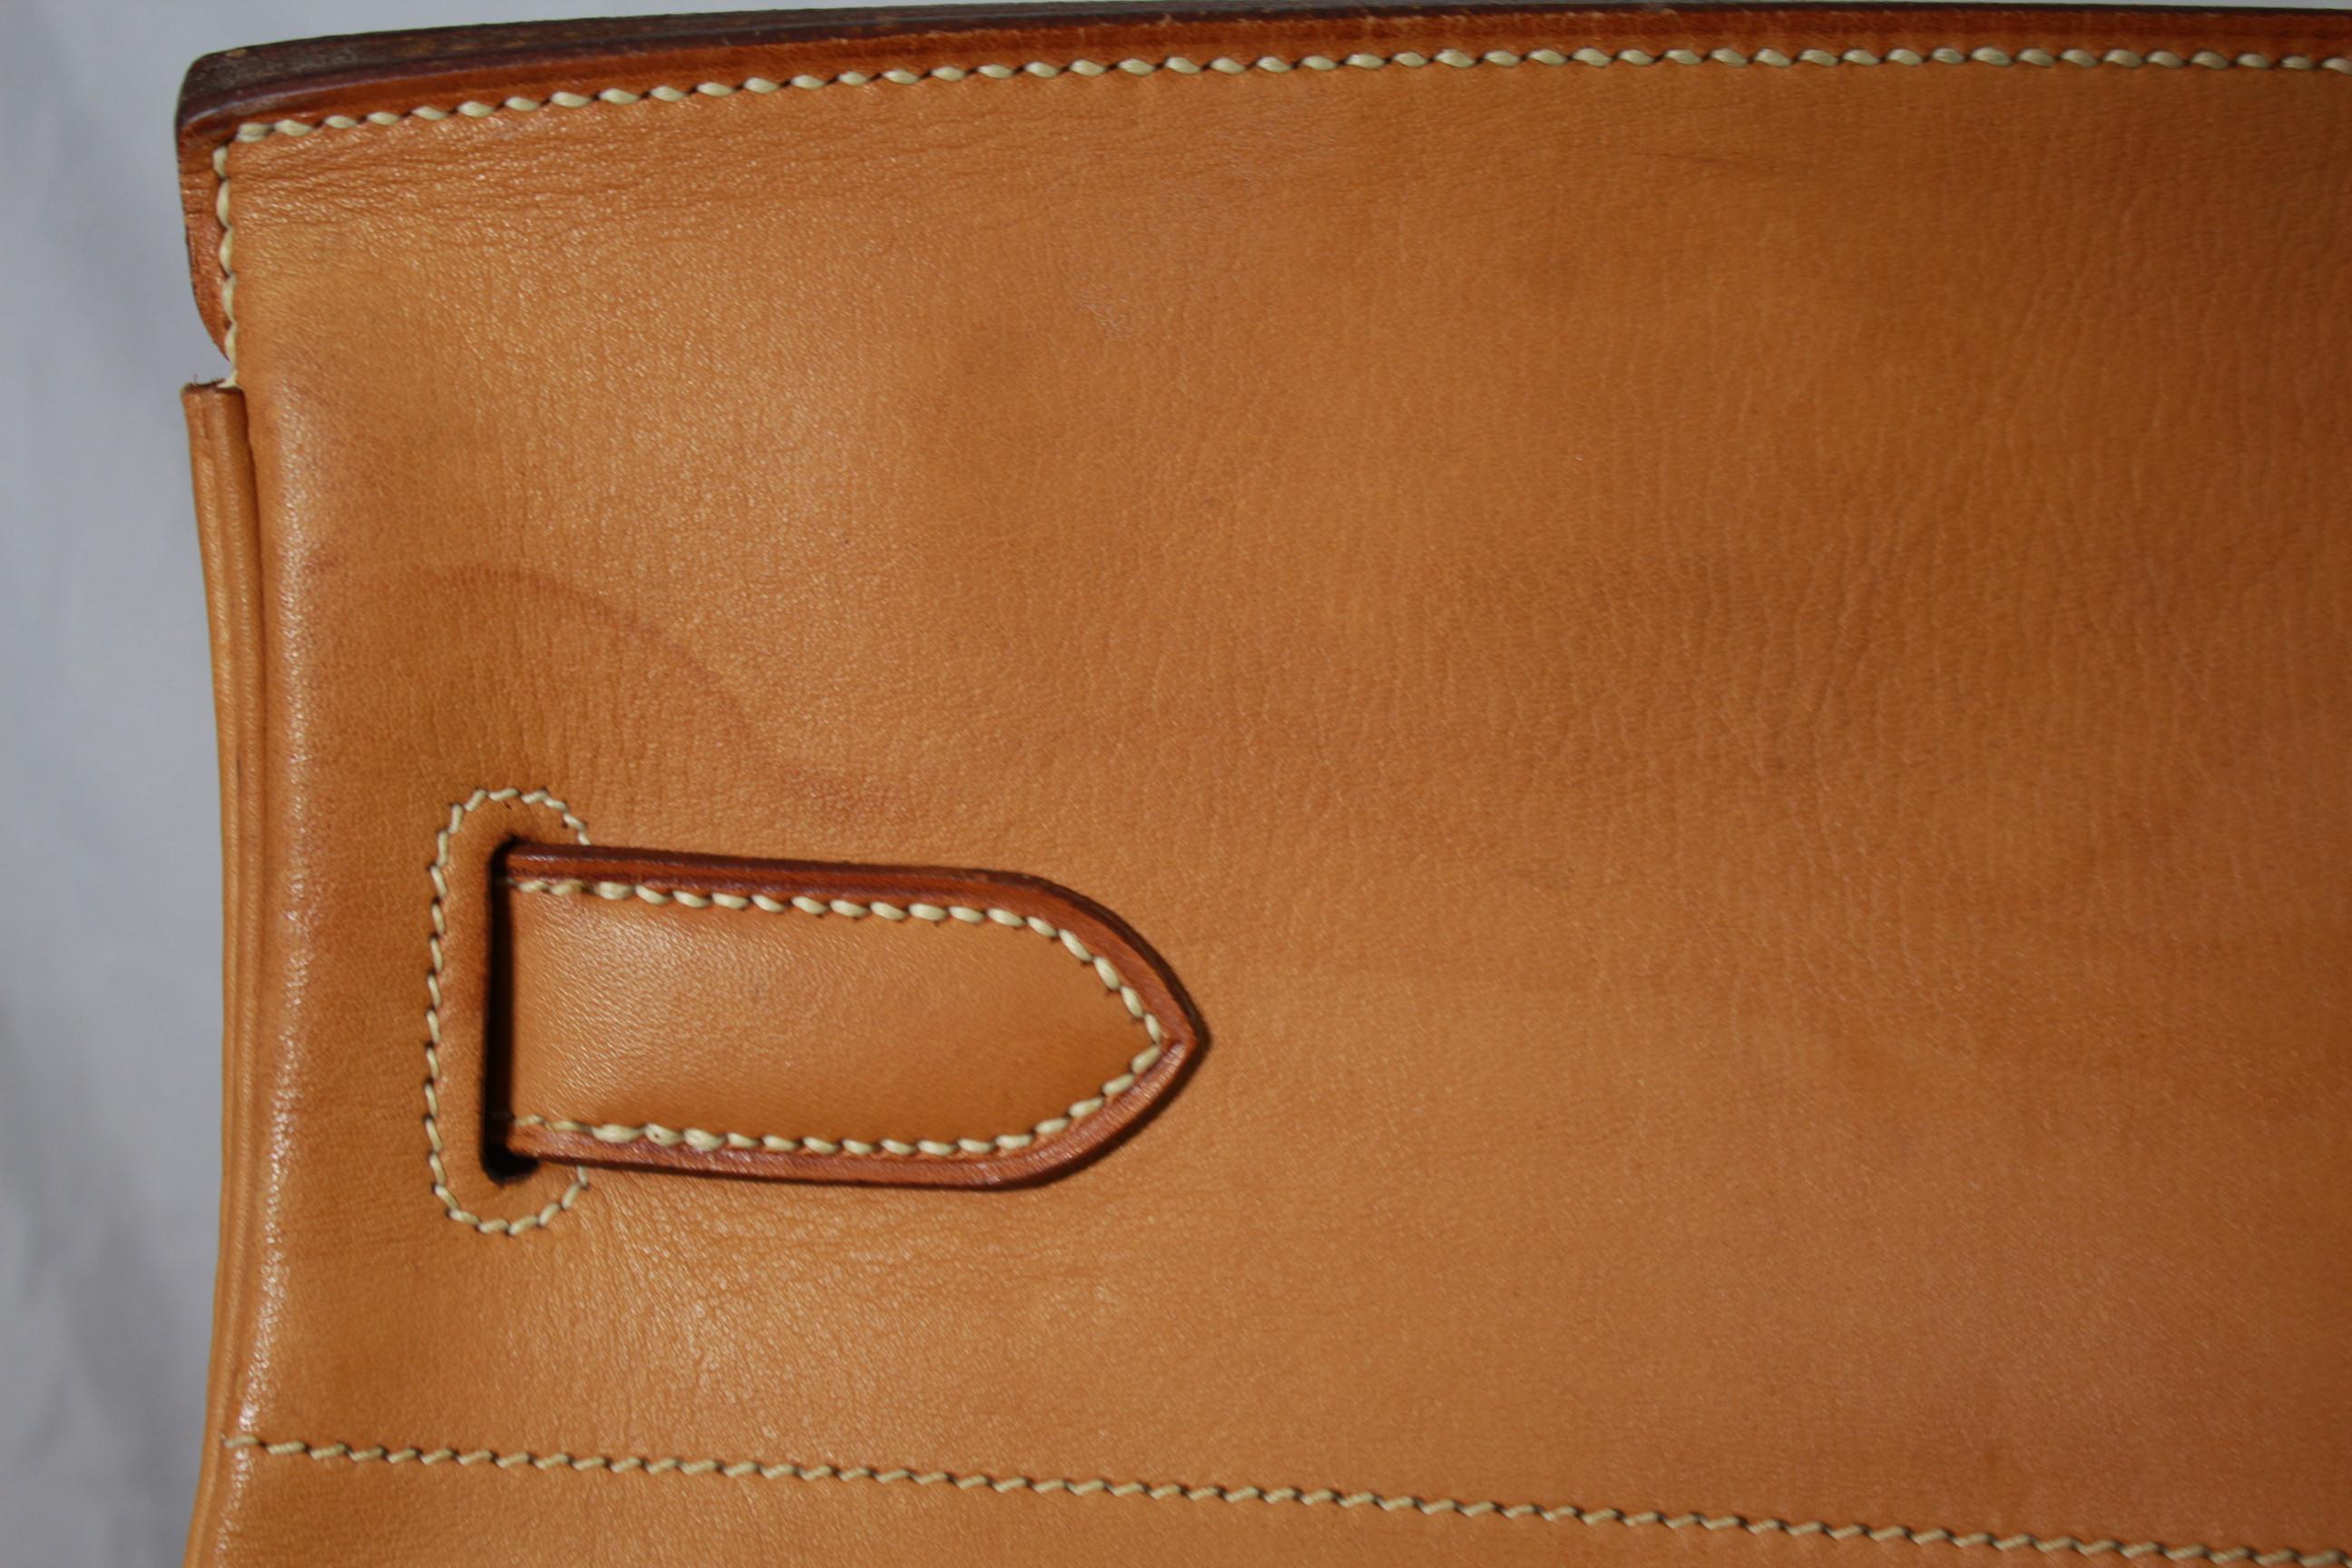 1977 Hermes Travel XL Haut à Courroies in Brown Natural Leather Barenia Style 4